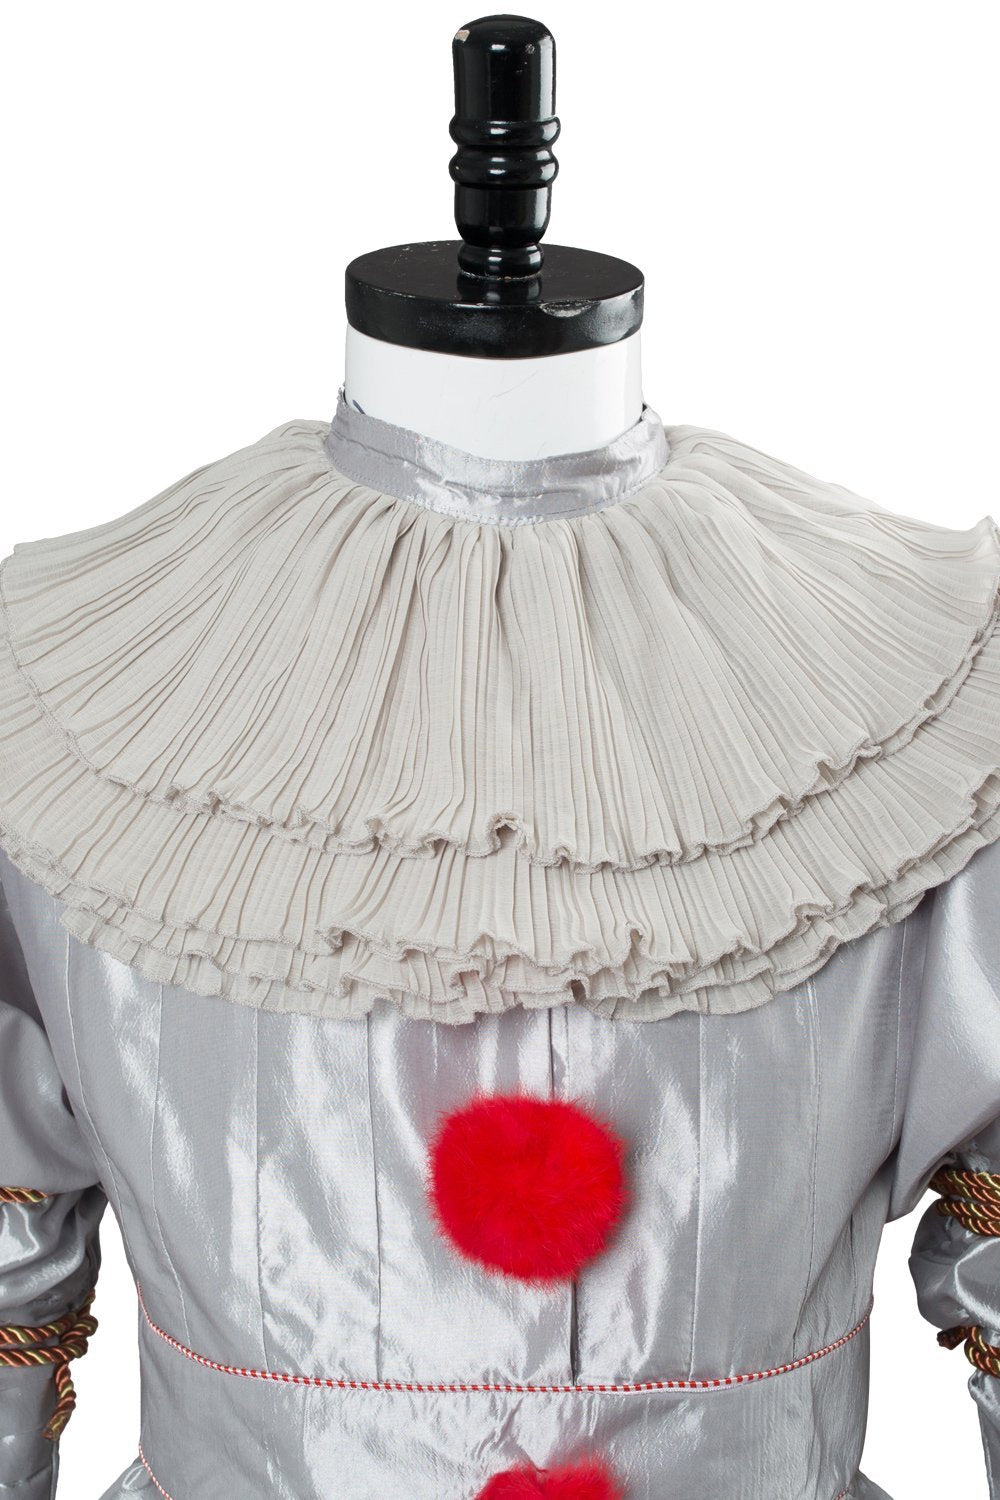 Gvavaya Cosplay Pennywise Clown Cosplay Costume Stephen King's Halloween Party Performance Costume